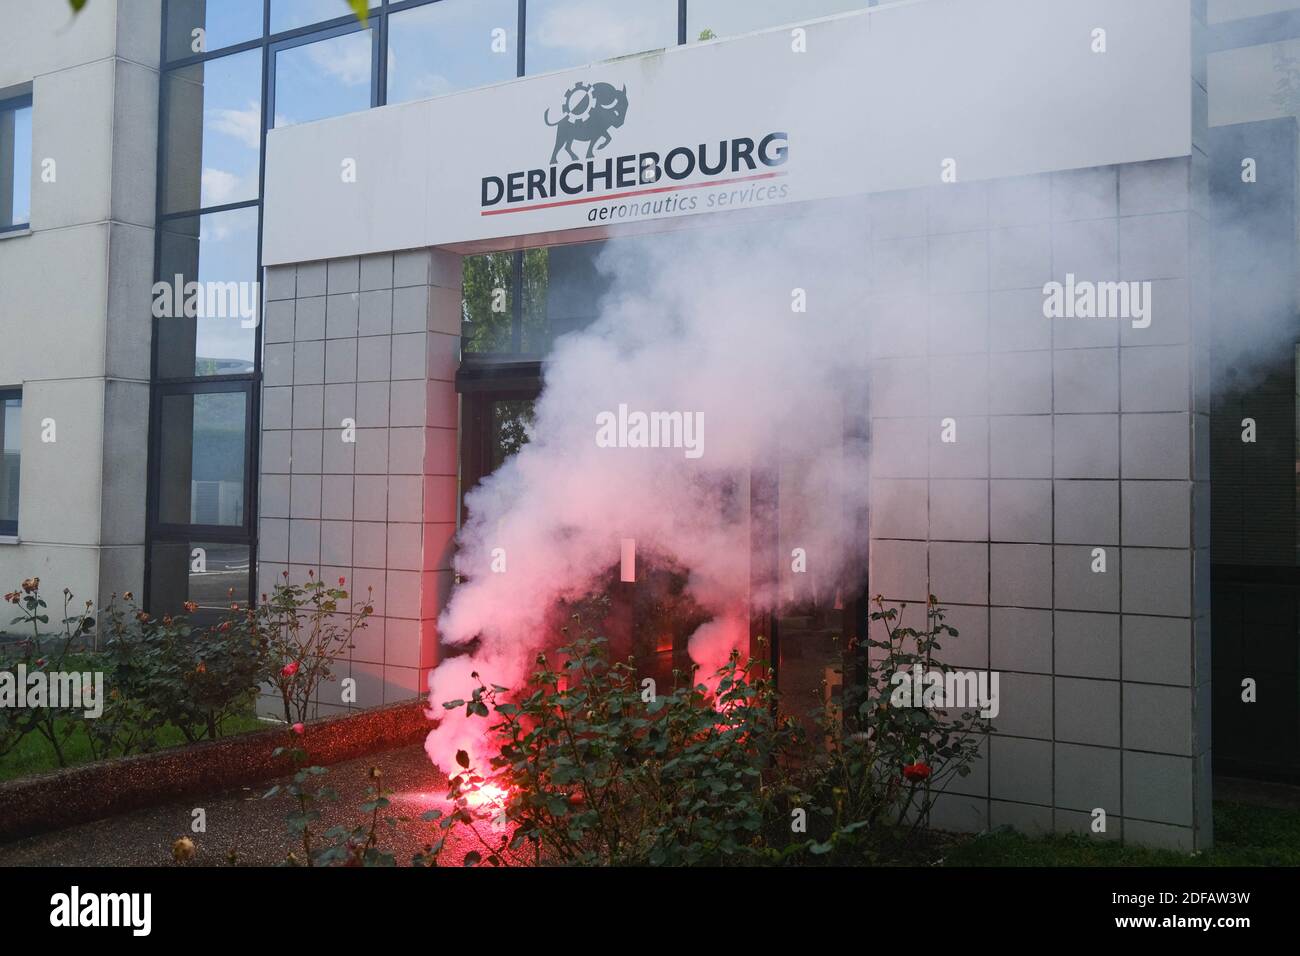 The employees of Derichebourg Aeronautics Services, an Airbus subcontractor, mobilized in front of their company's headquarters, on June 12, 2020, in Toulouse - Blagnac (France). They expressed their dissatisfaction against a social plan validated by the majority union FO (Force Ouvrière). This plan, developed because of the crisis in the aeronautical industry, plans to cut wages and suspend benefits. Without signing these measures, management threatened to lay off up to half of the 1,600 employees in September. Photo by Patrick Batard/ABACAPRESS.COM Stock Photo